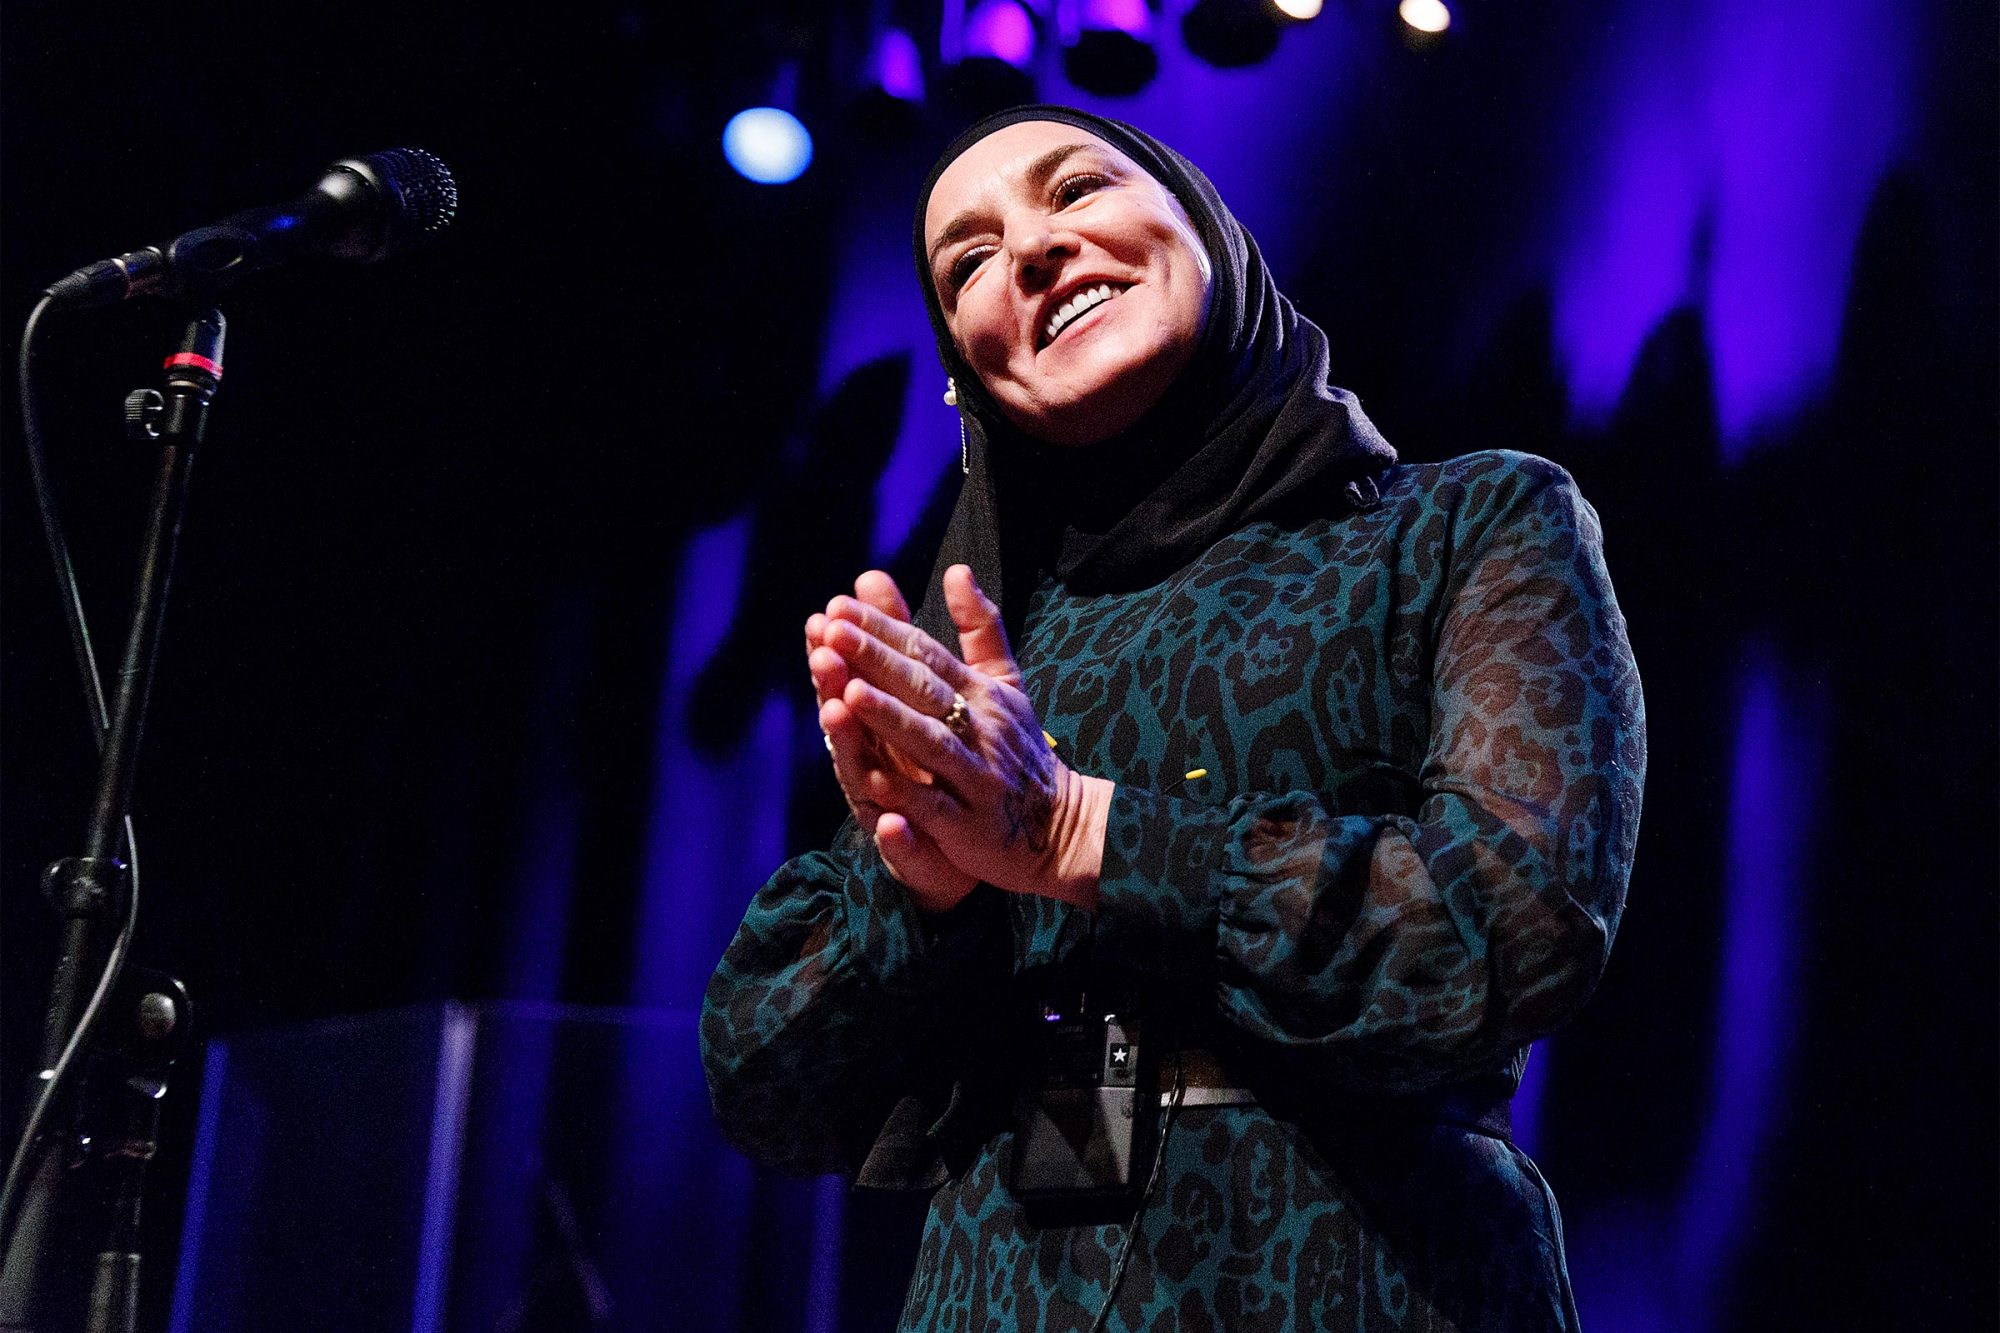 Sinéad O'Connor converted to Islam in 2018, and changed her name to Shuhada' Sadaqat